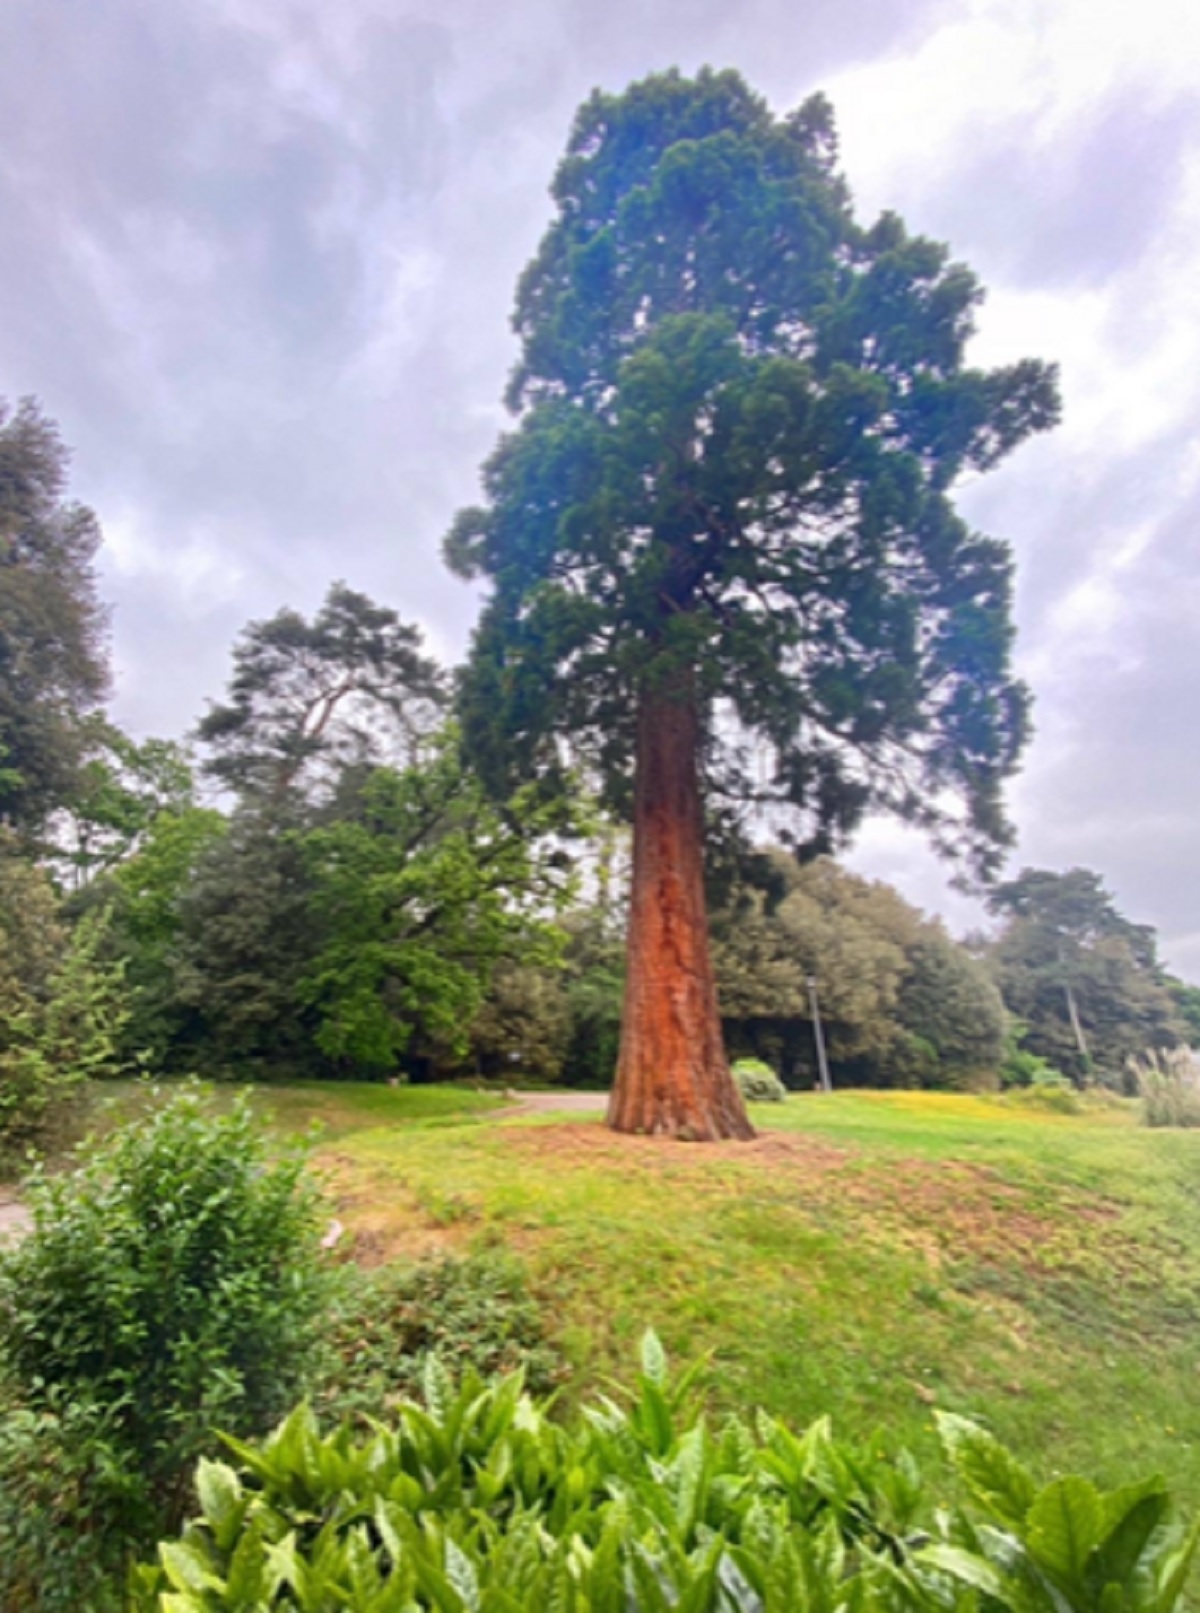 Rooted in the past - this magnificent tree remains on the site